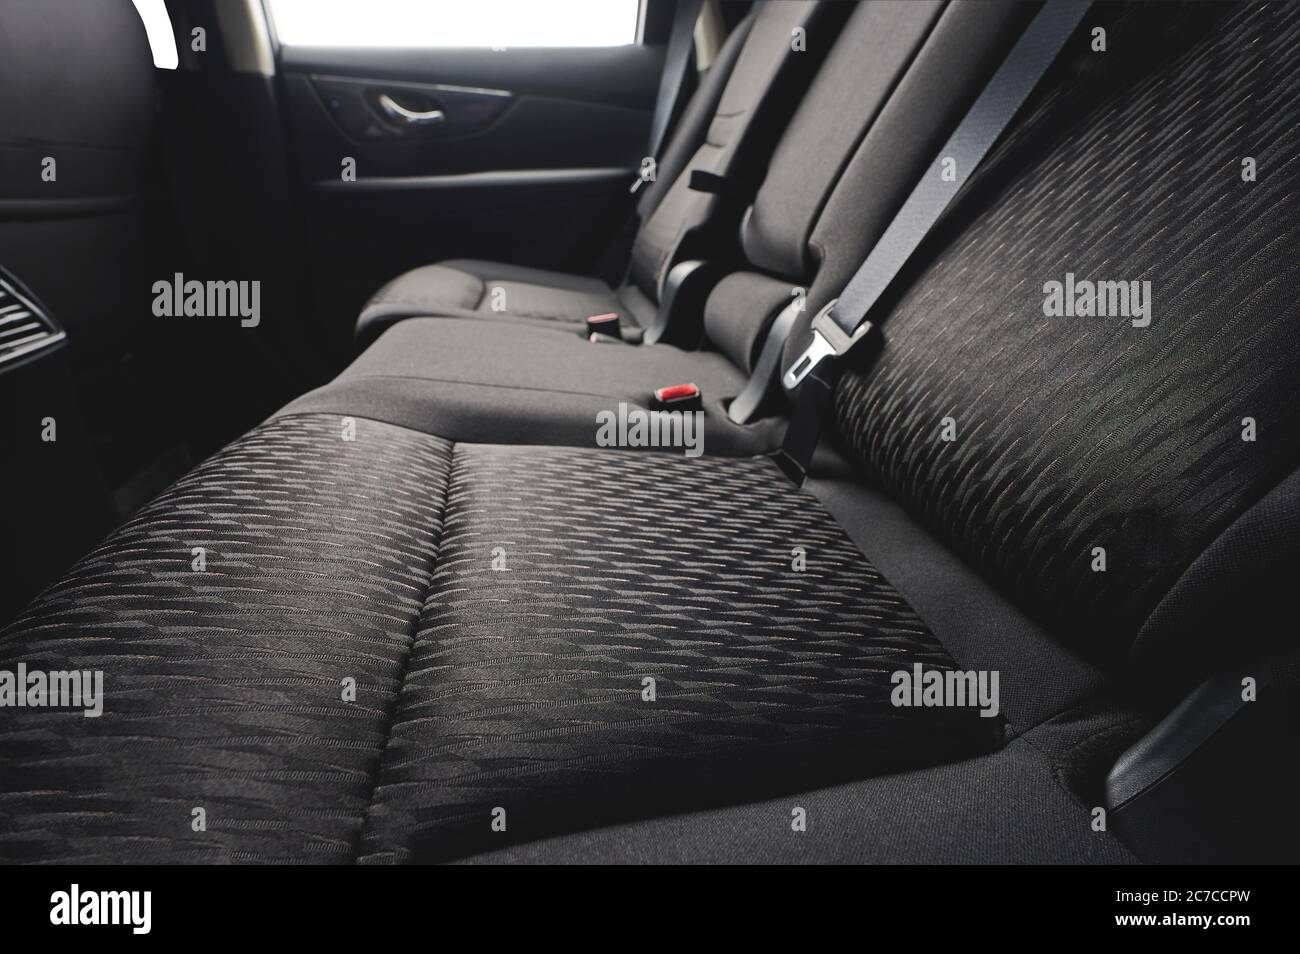 Close up of clean cloth car back seat with safety belts Stock Photo